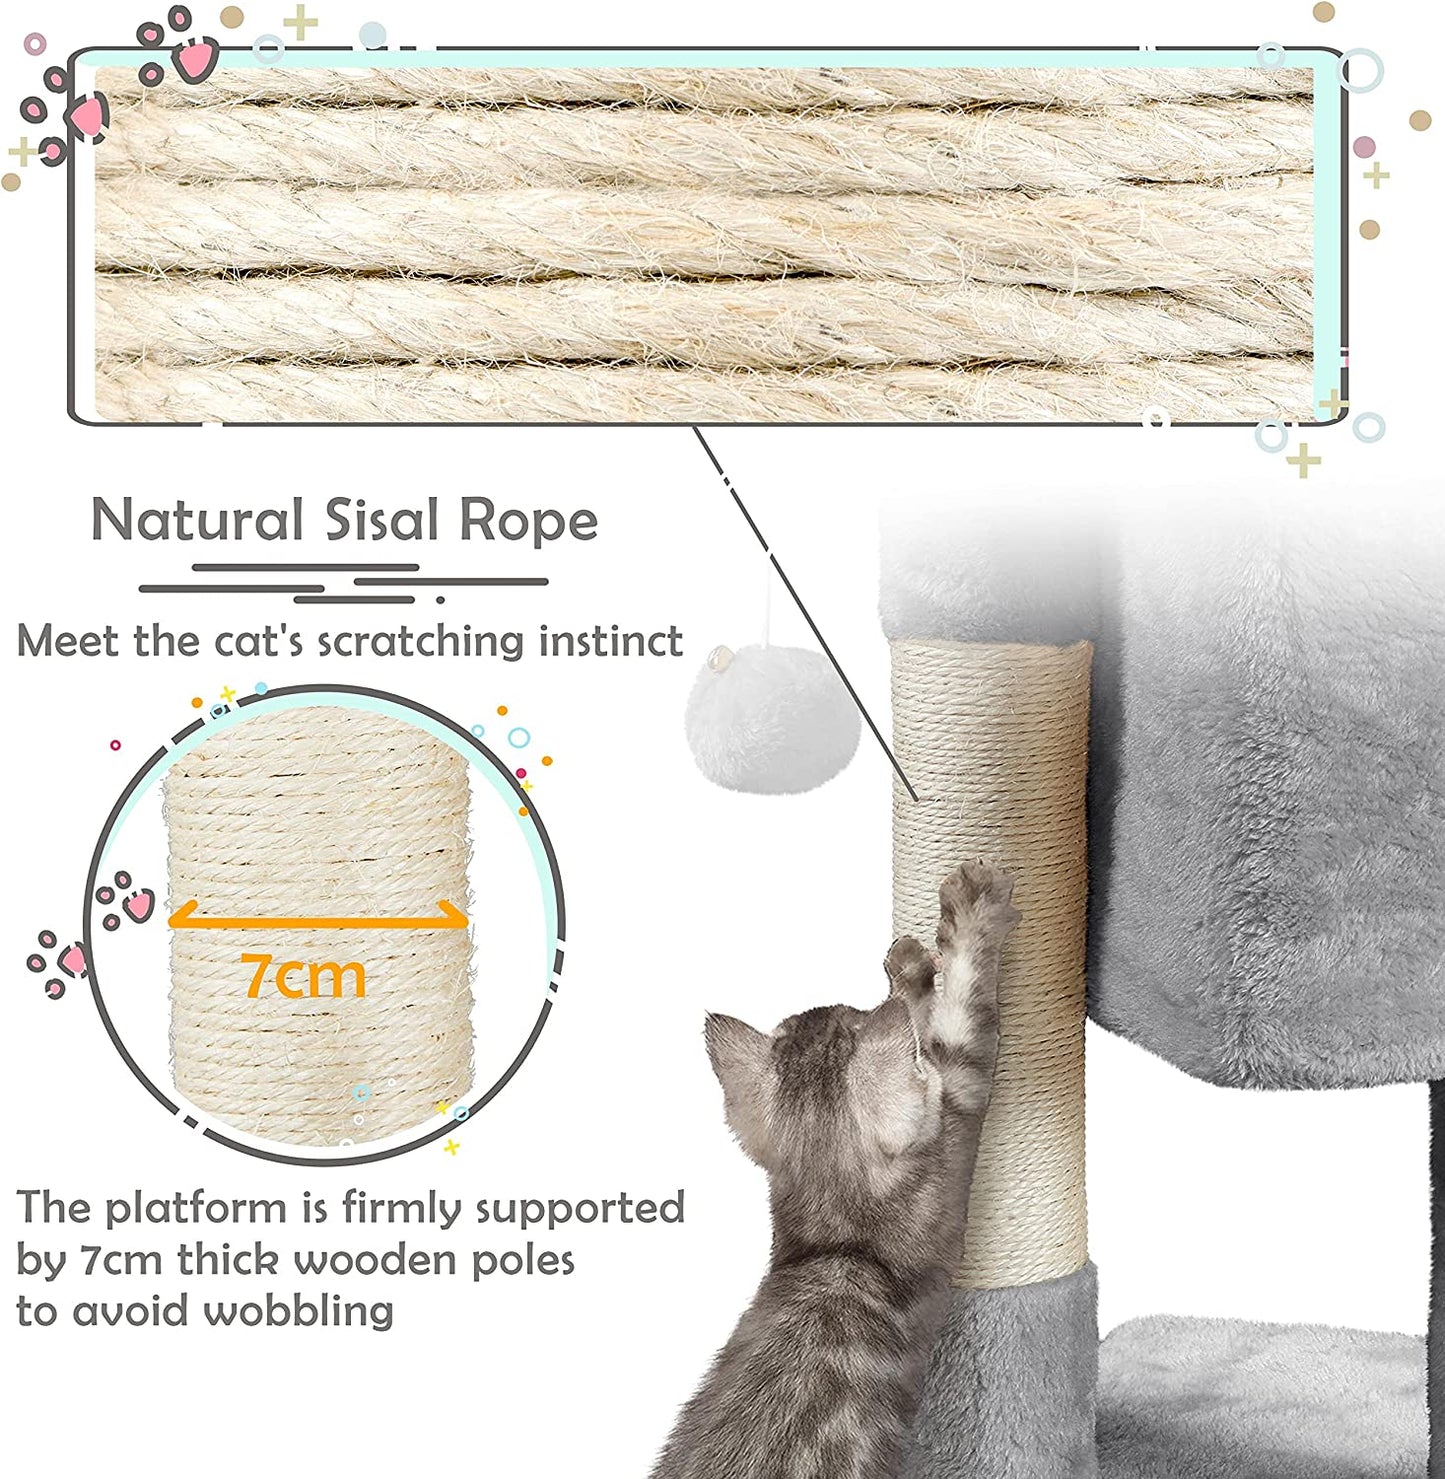 23.5In Cat Tree Tower, Cat Condo with Sisal-Covered Scratching Posts, Cat House Activity Center Furniture for Kittens, Cats and Pets - Light Gray